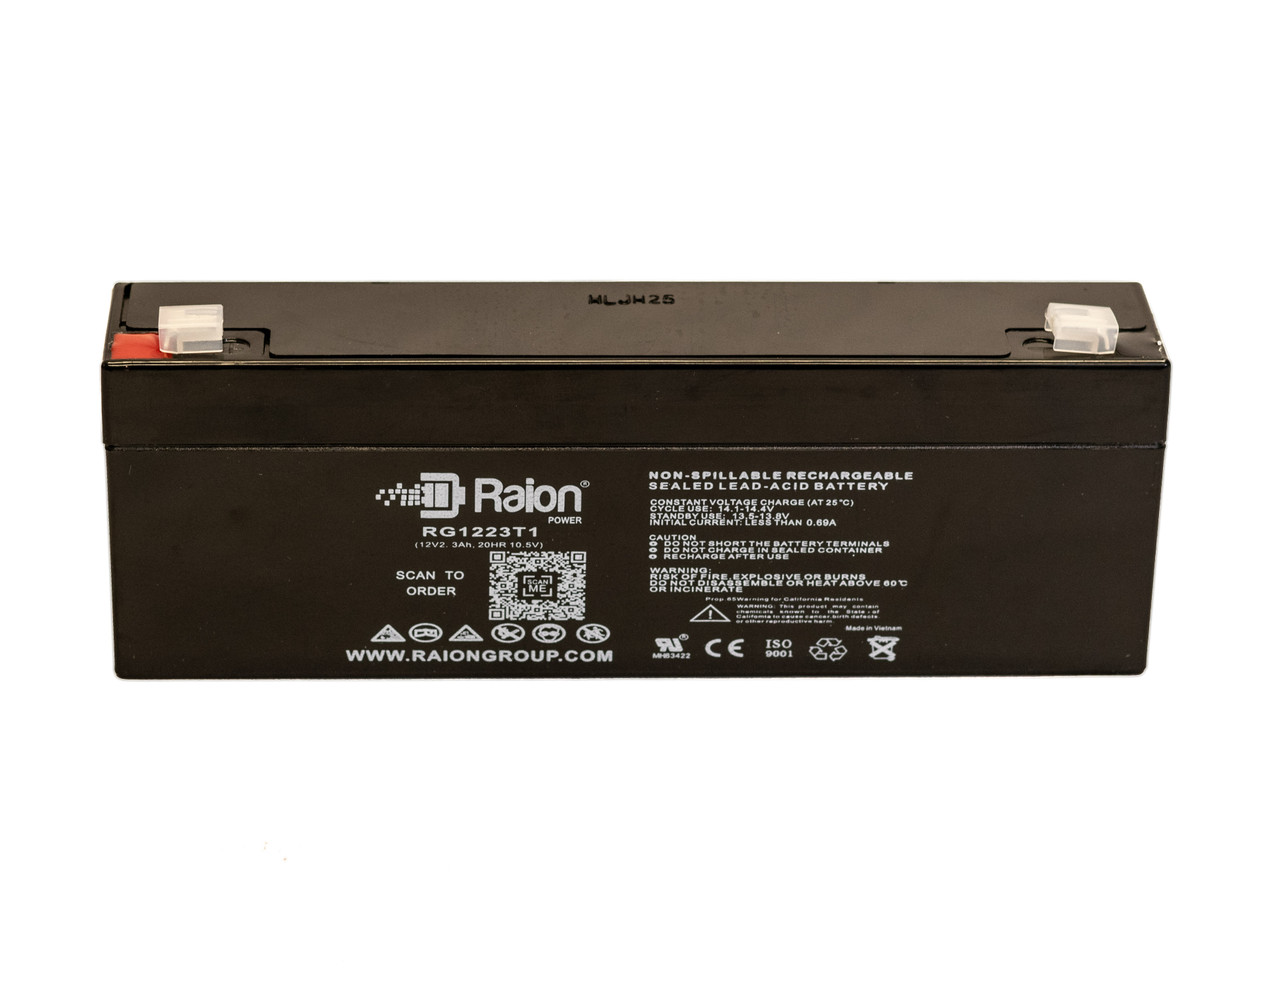 Raion Power 12V 2.3Ah SLA Battery With T1 Terminals For Dr Power Equipment 143871WT2.9-12